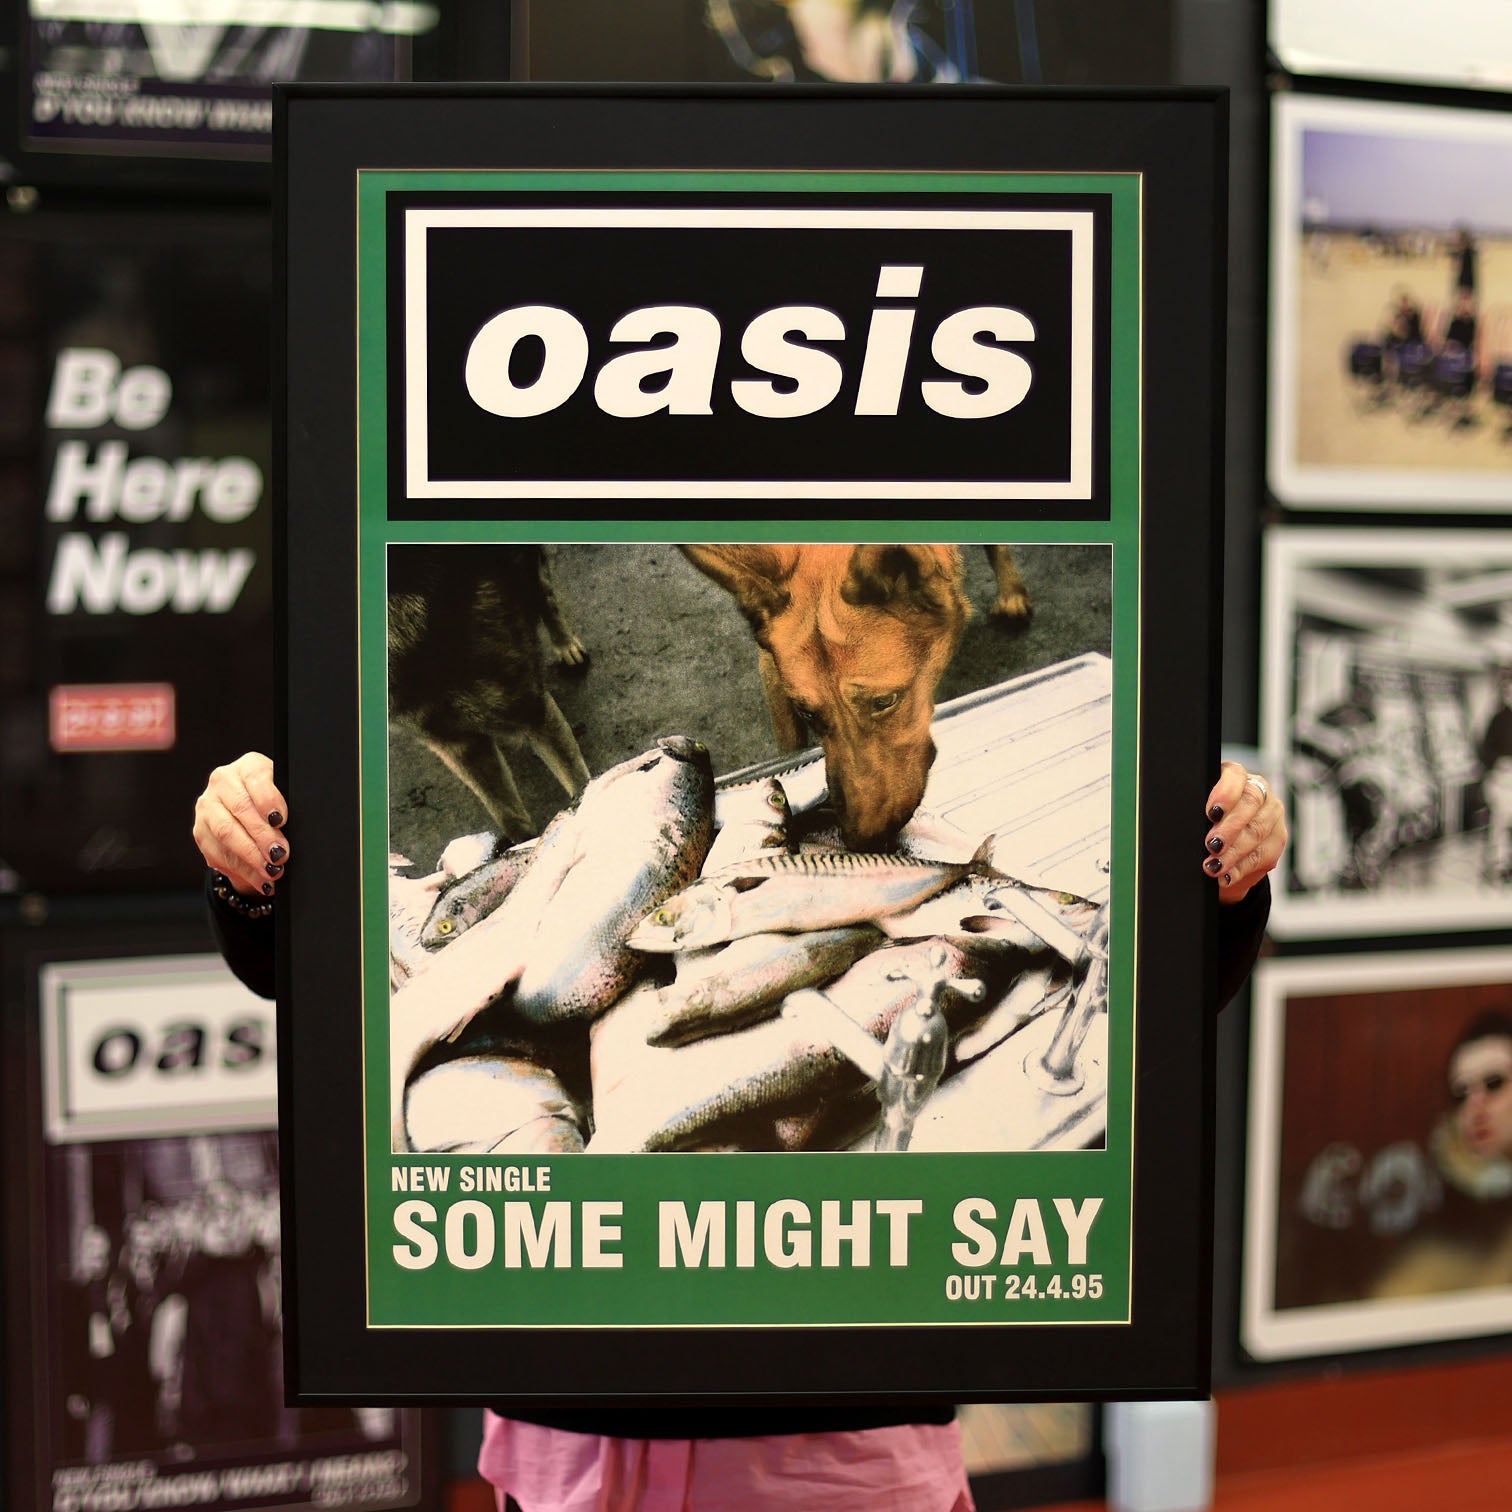 Oasis 'Some Might Say' 1995 Original Street Flyposter - New Item